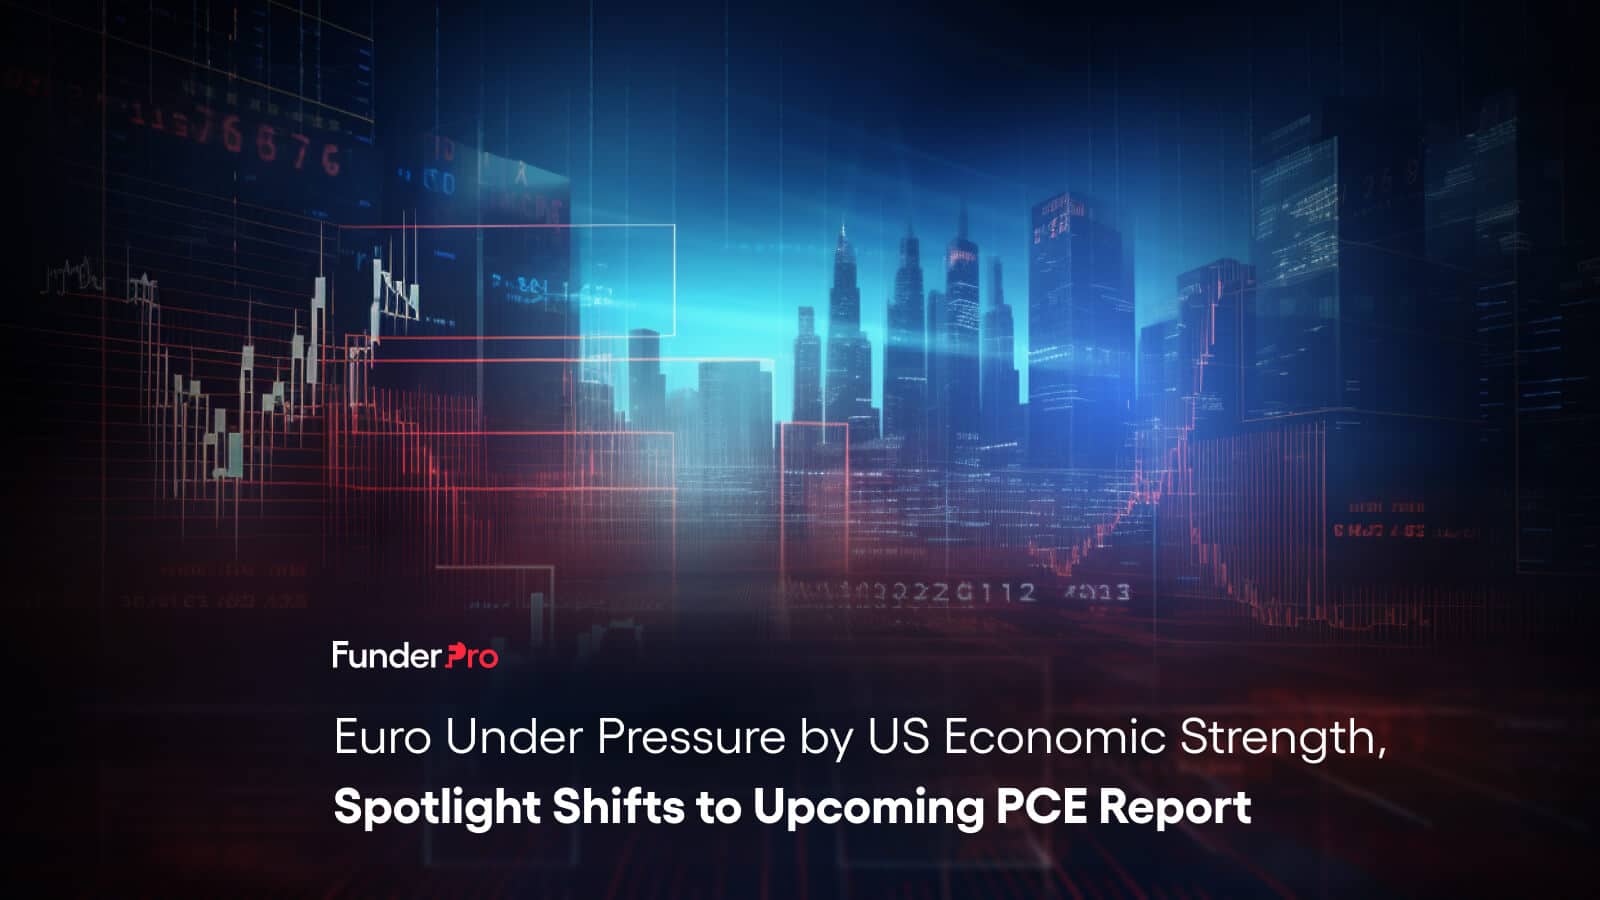 Euro Under Pressure by US Economic Strength, Spotlight Shifts to Upcoming PCE Report